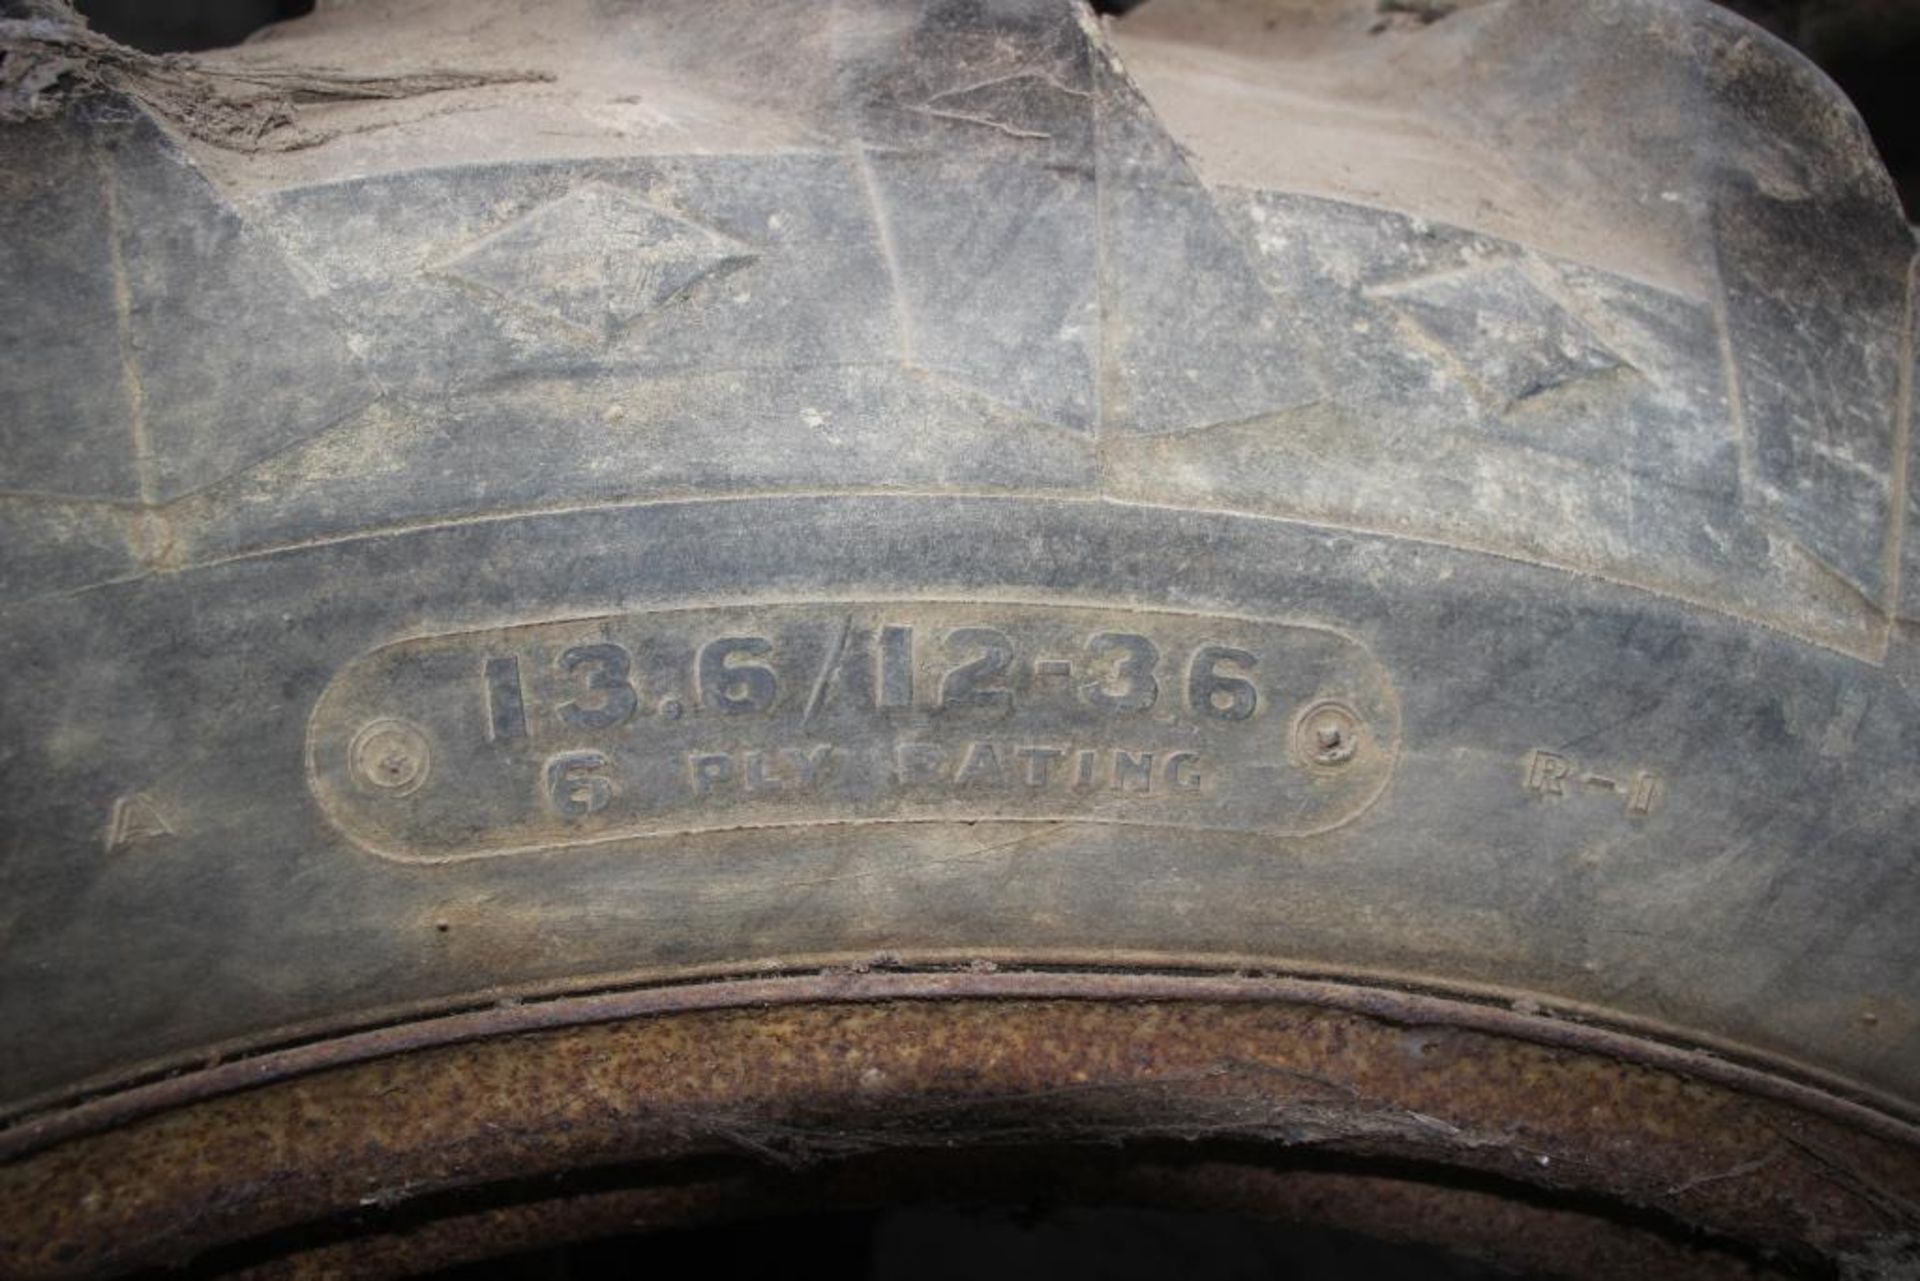 Dual Wheels 13.6/12-36 3 star Pair of 3 star dual wheels, Trailer tyre 7-20 Location: Lincoln, Lincs - Image 4 of 4